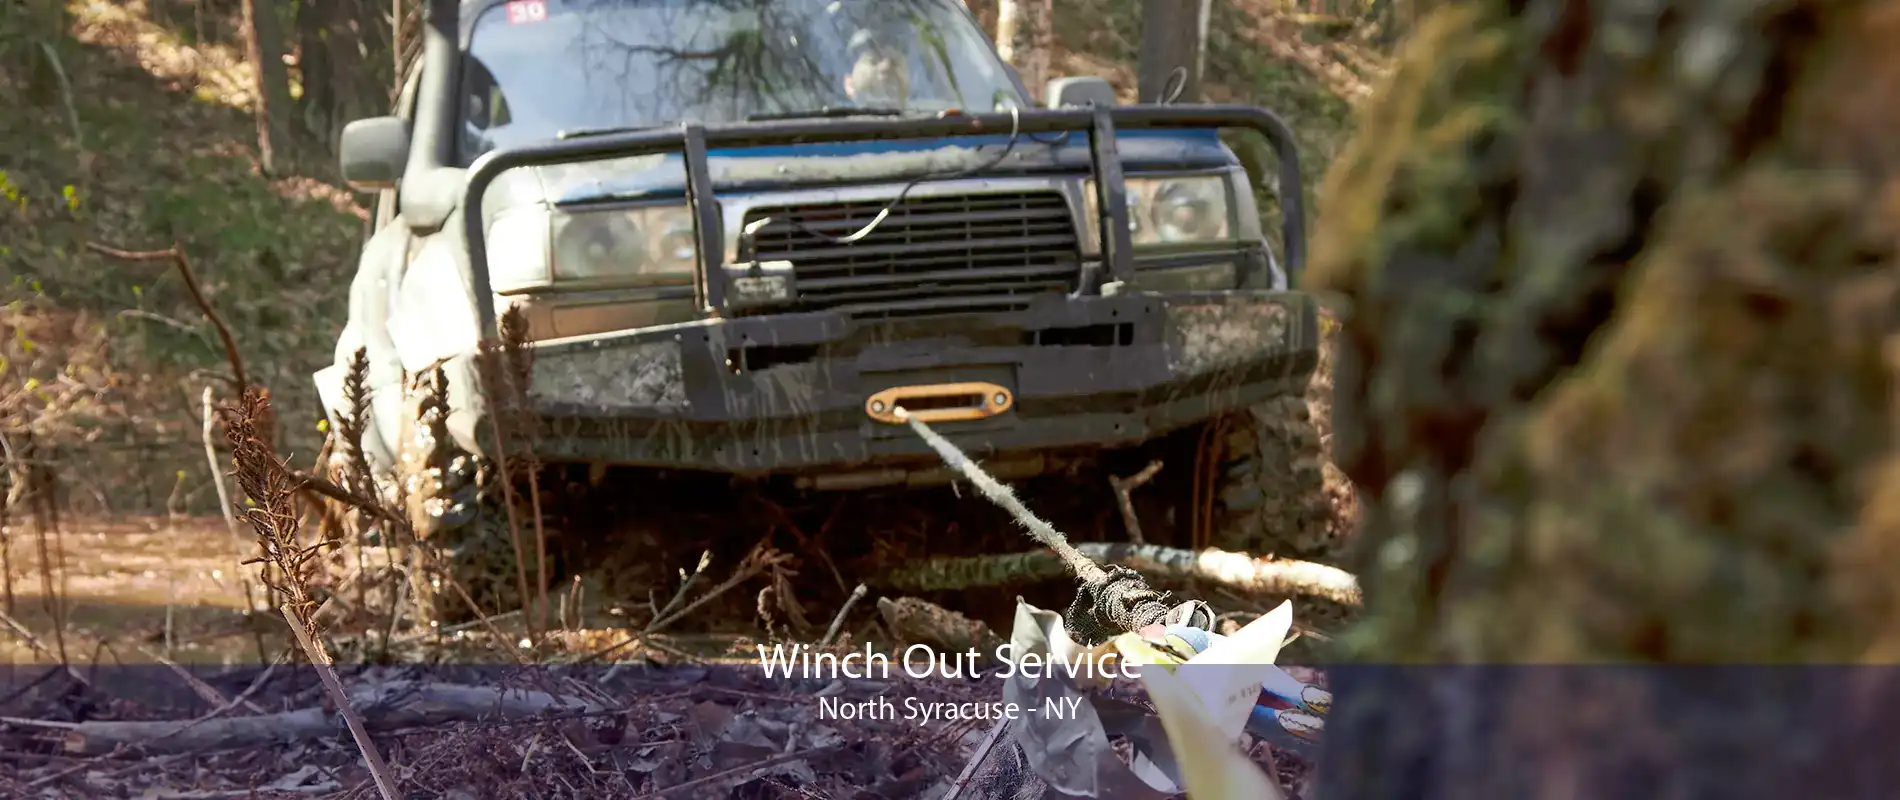 Winch Out Service North Syracuse - NY